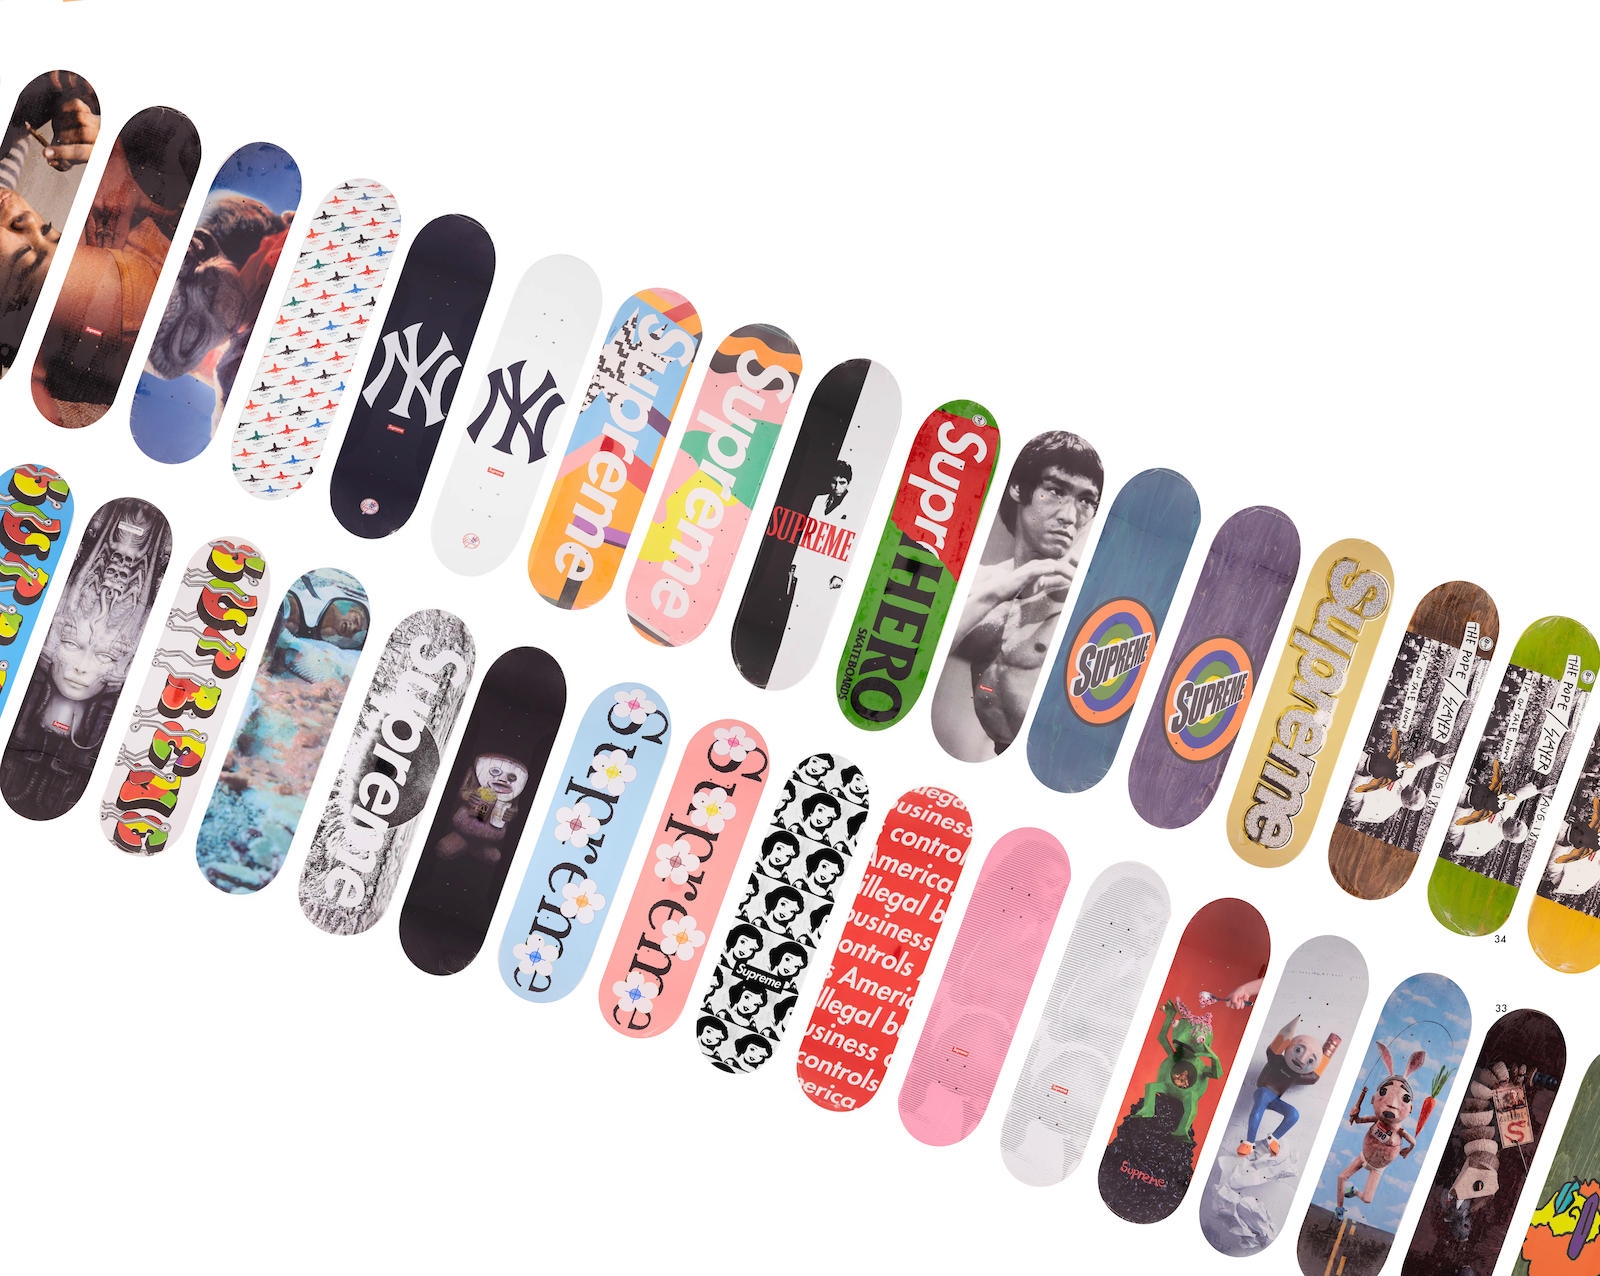 Supreme A Complete Group Of 131 Full Sized Supreme Skateboard Decks Mutualart